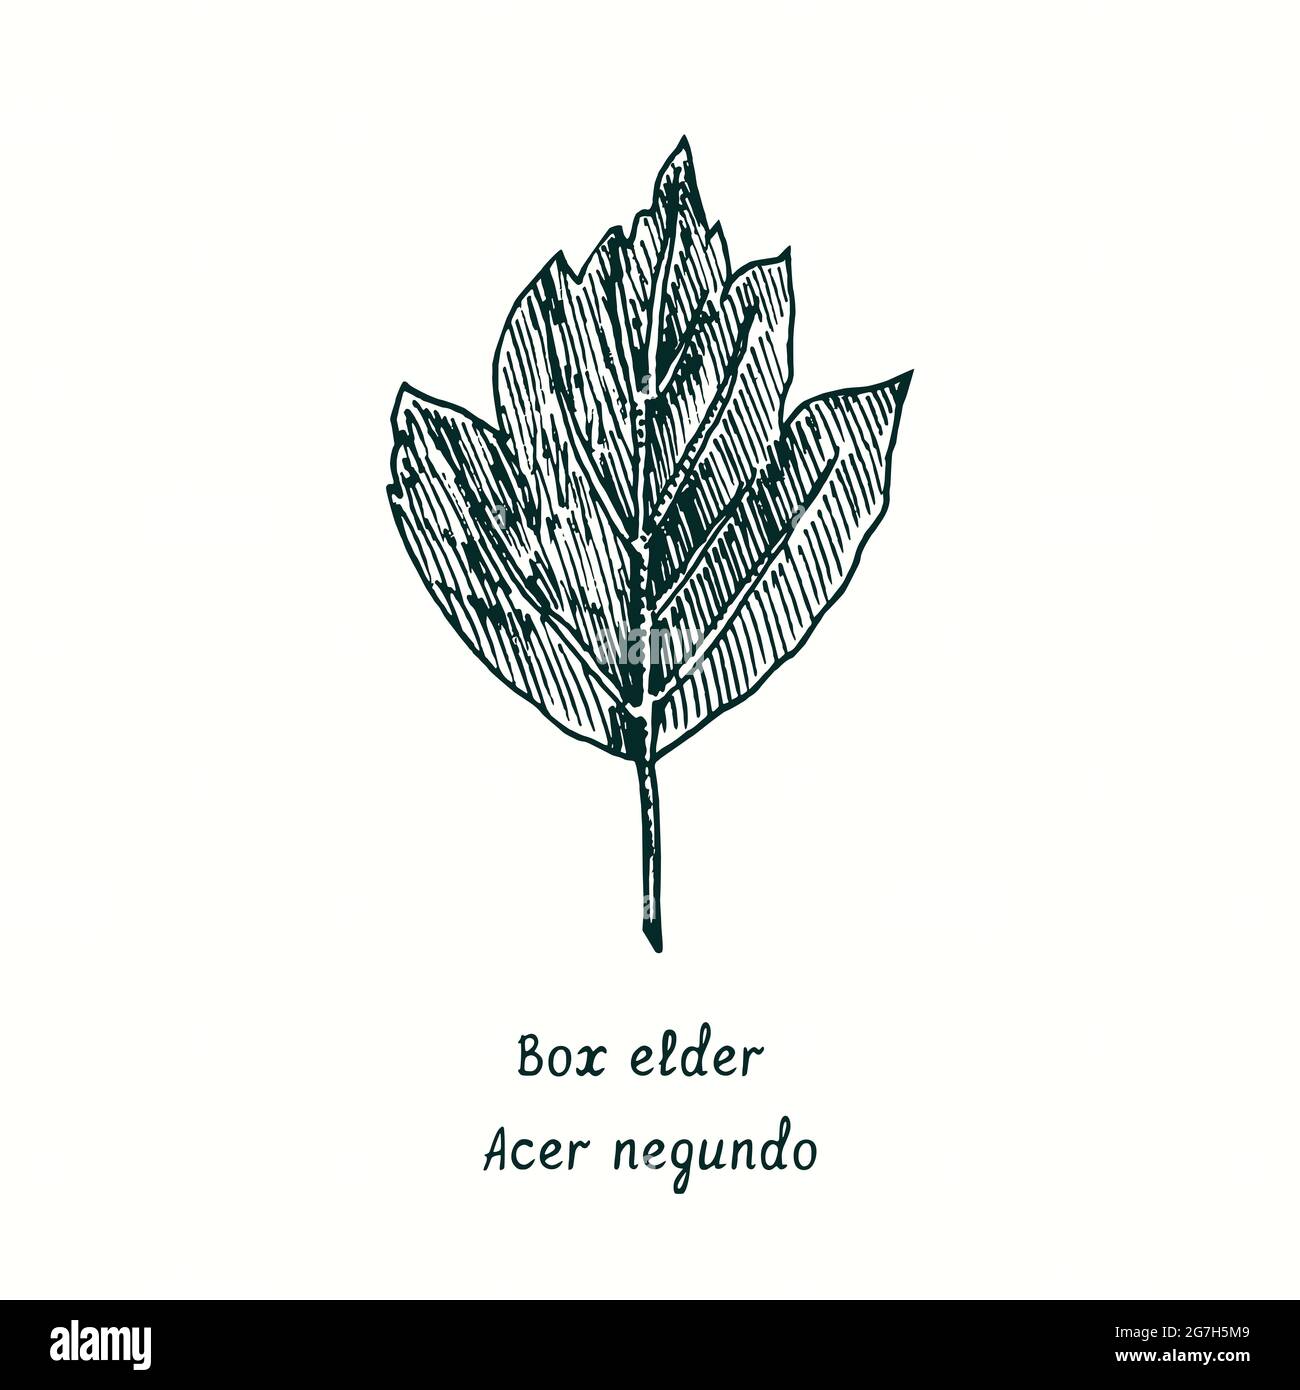 Box elder (Acer negundo) leaf. Ink black and white doodle drawing in woodcut style. Stock Photo